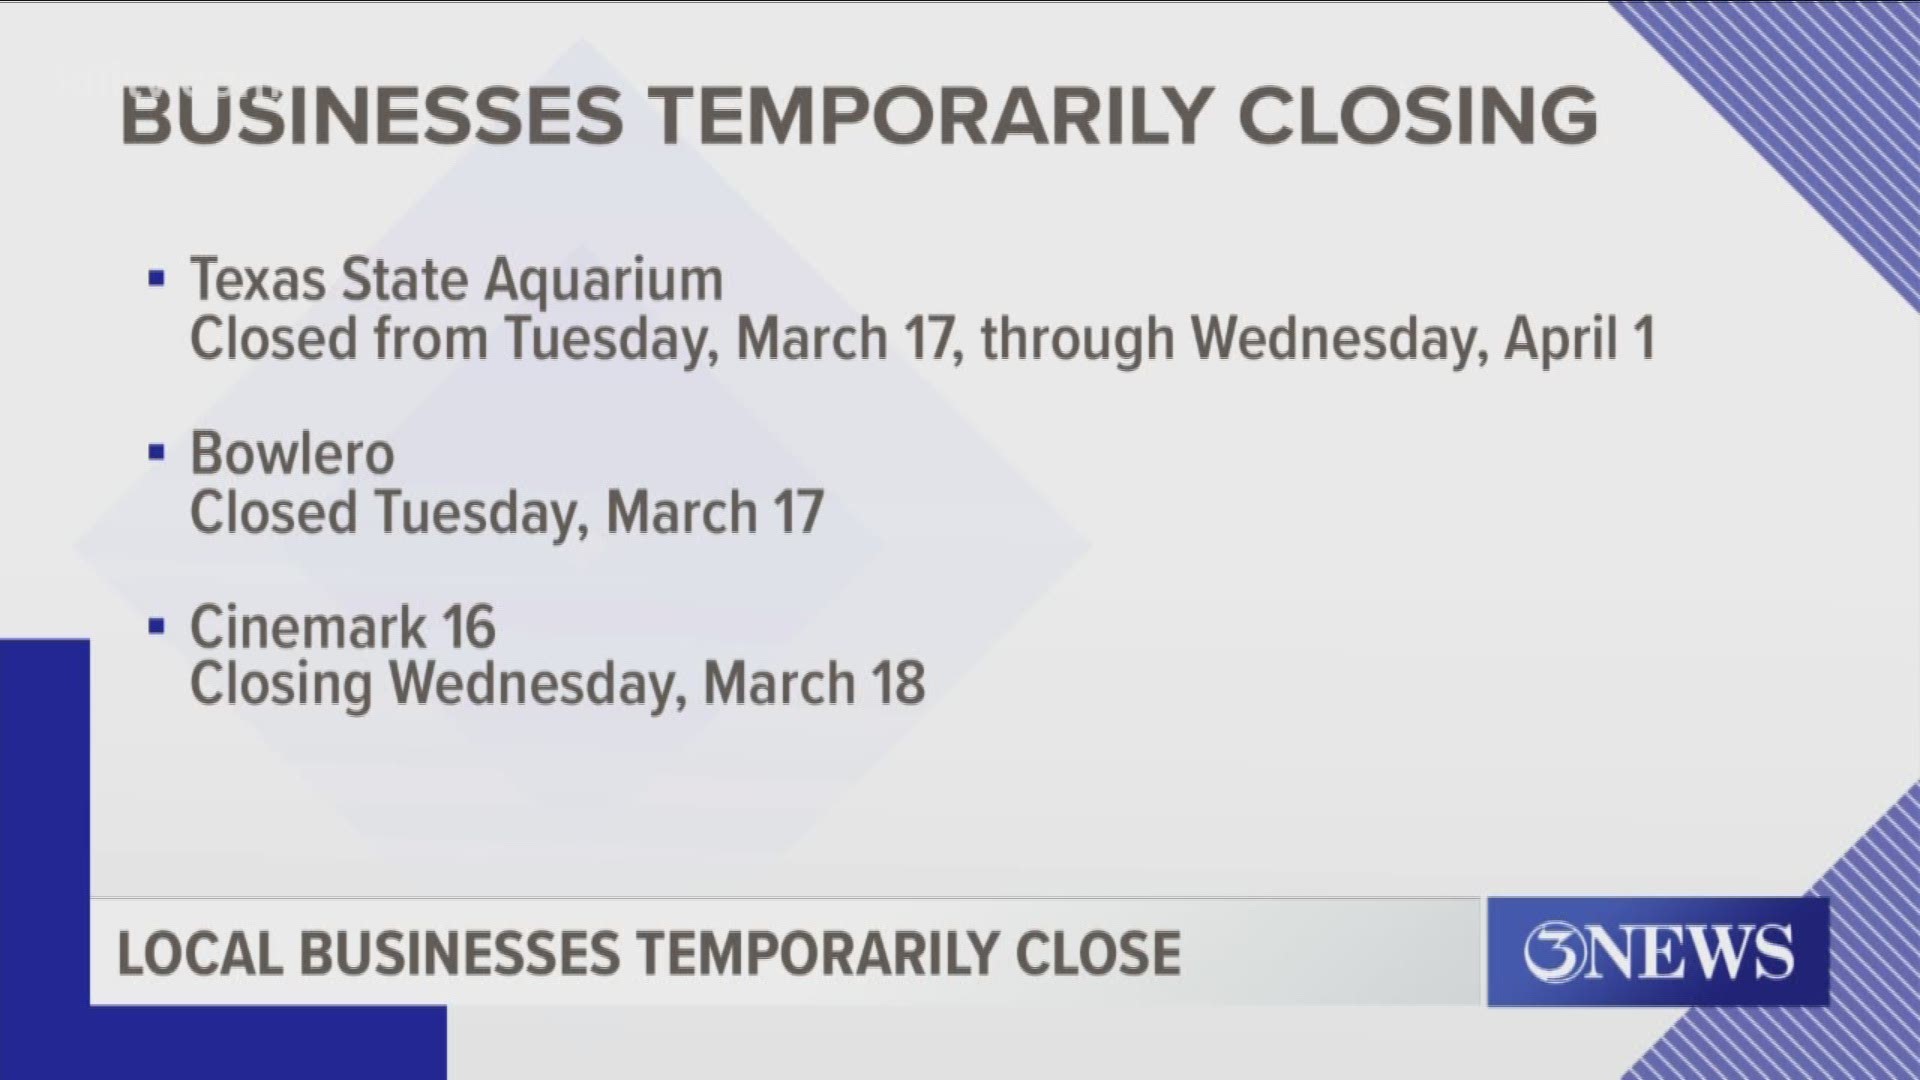 Several local businesses have announced that they will be closing temporarily in an effort to slow the spread of the COVID-19 coronavirus.